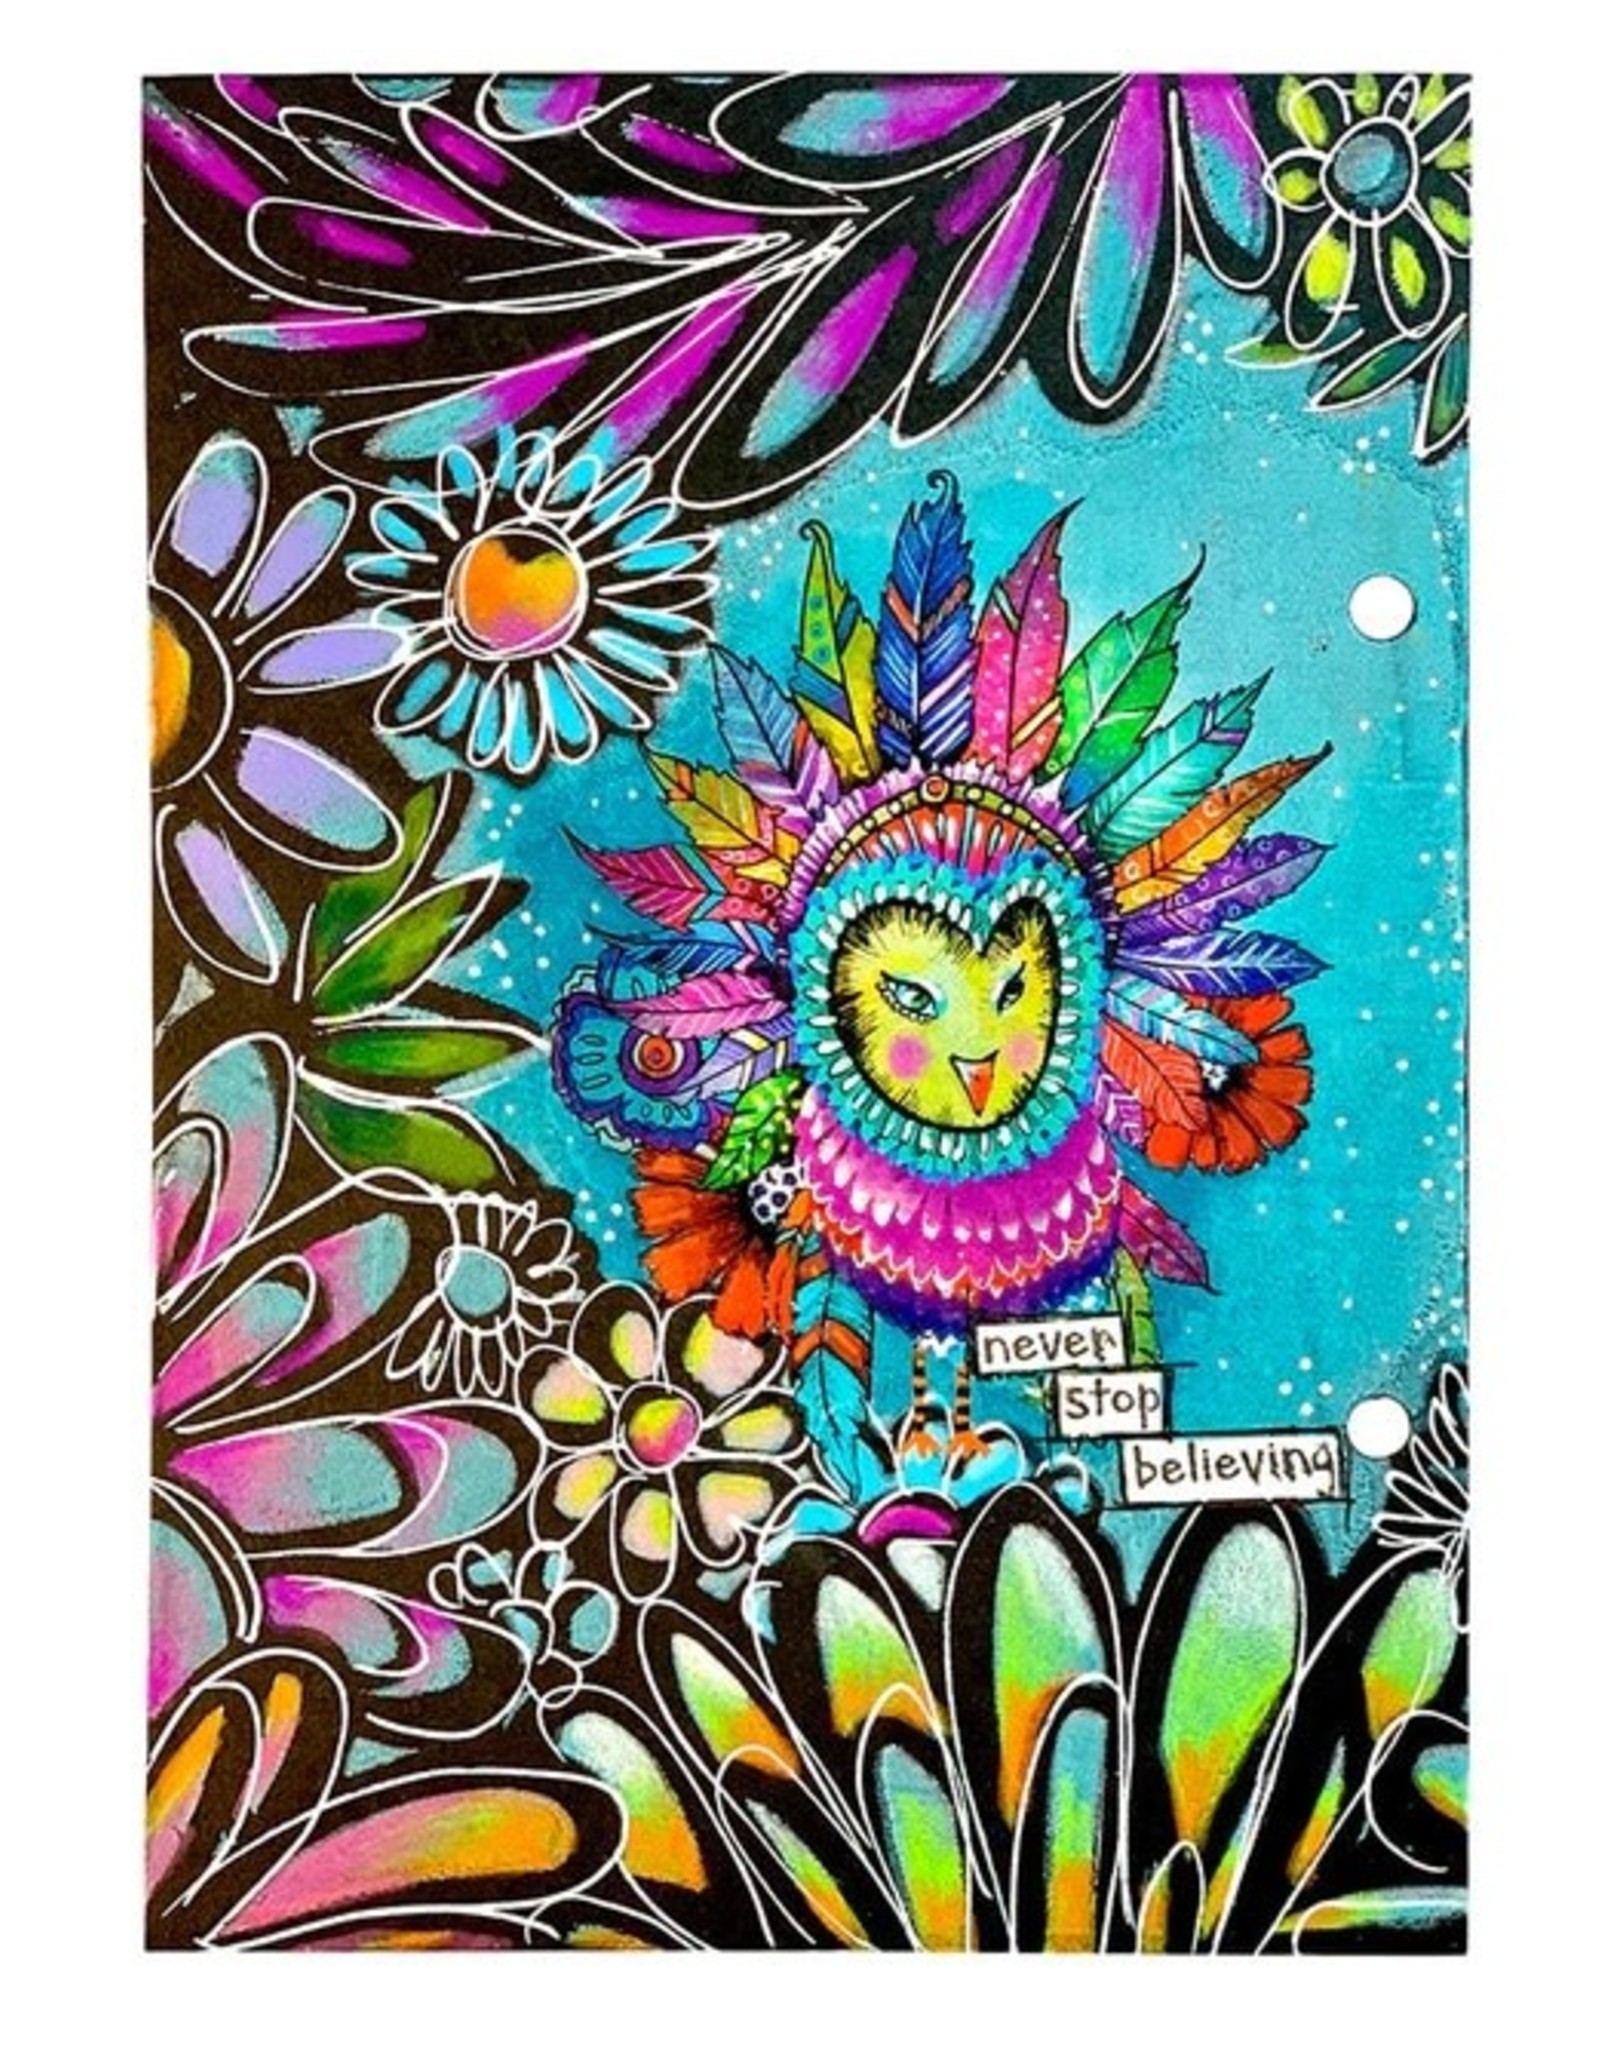 STUDIOLIGHT STUDIOLIGHT ART BY MARLENE SIGNATURE COLLECTION COLORFUL MIX WATER TRANSFER PAPER